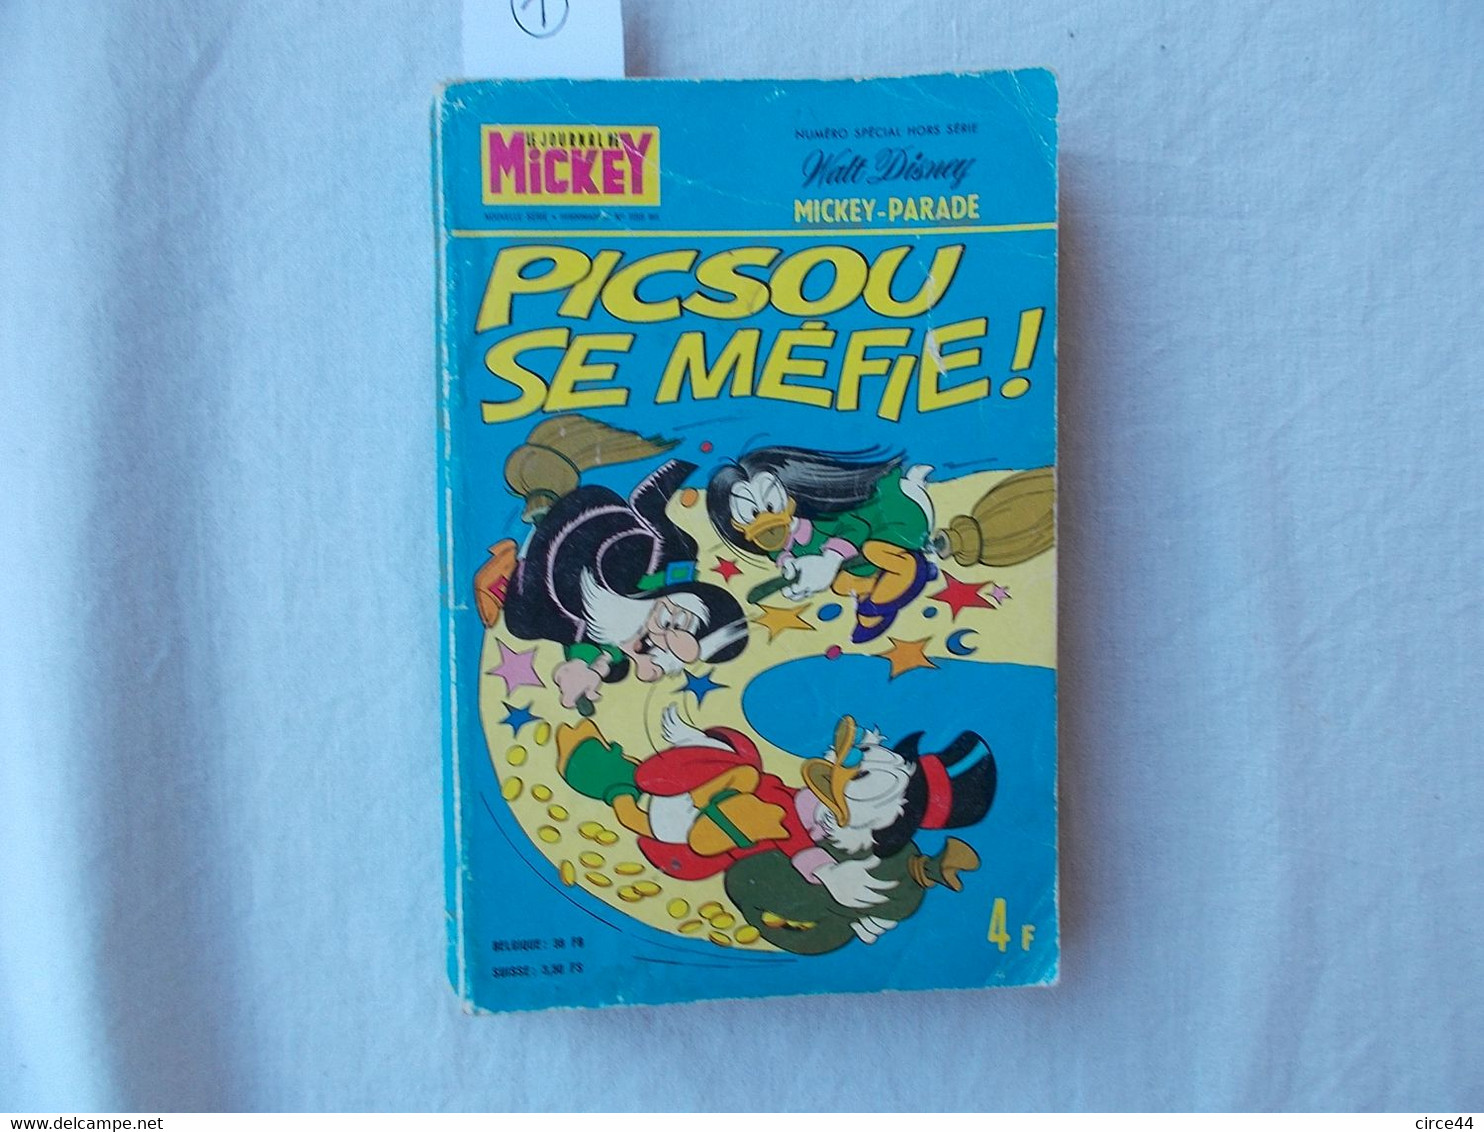 JOURNAL DE MICKEY.WALT DISNEY.MICKEY PARADE.254 PAGES.ANNEE 1974..PICSOU SE MEFIE.HORS SERIE. - Mickey Parade